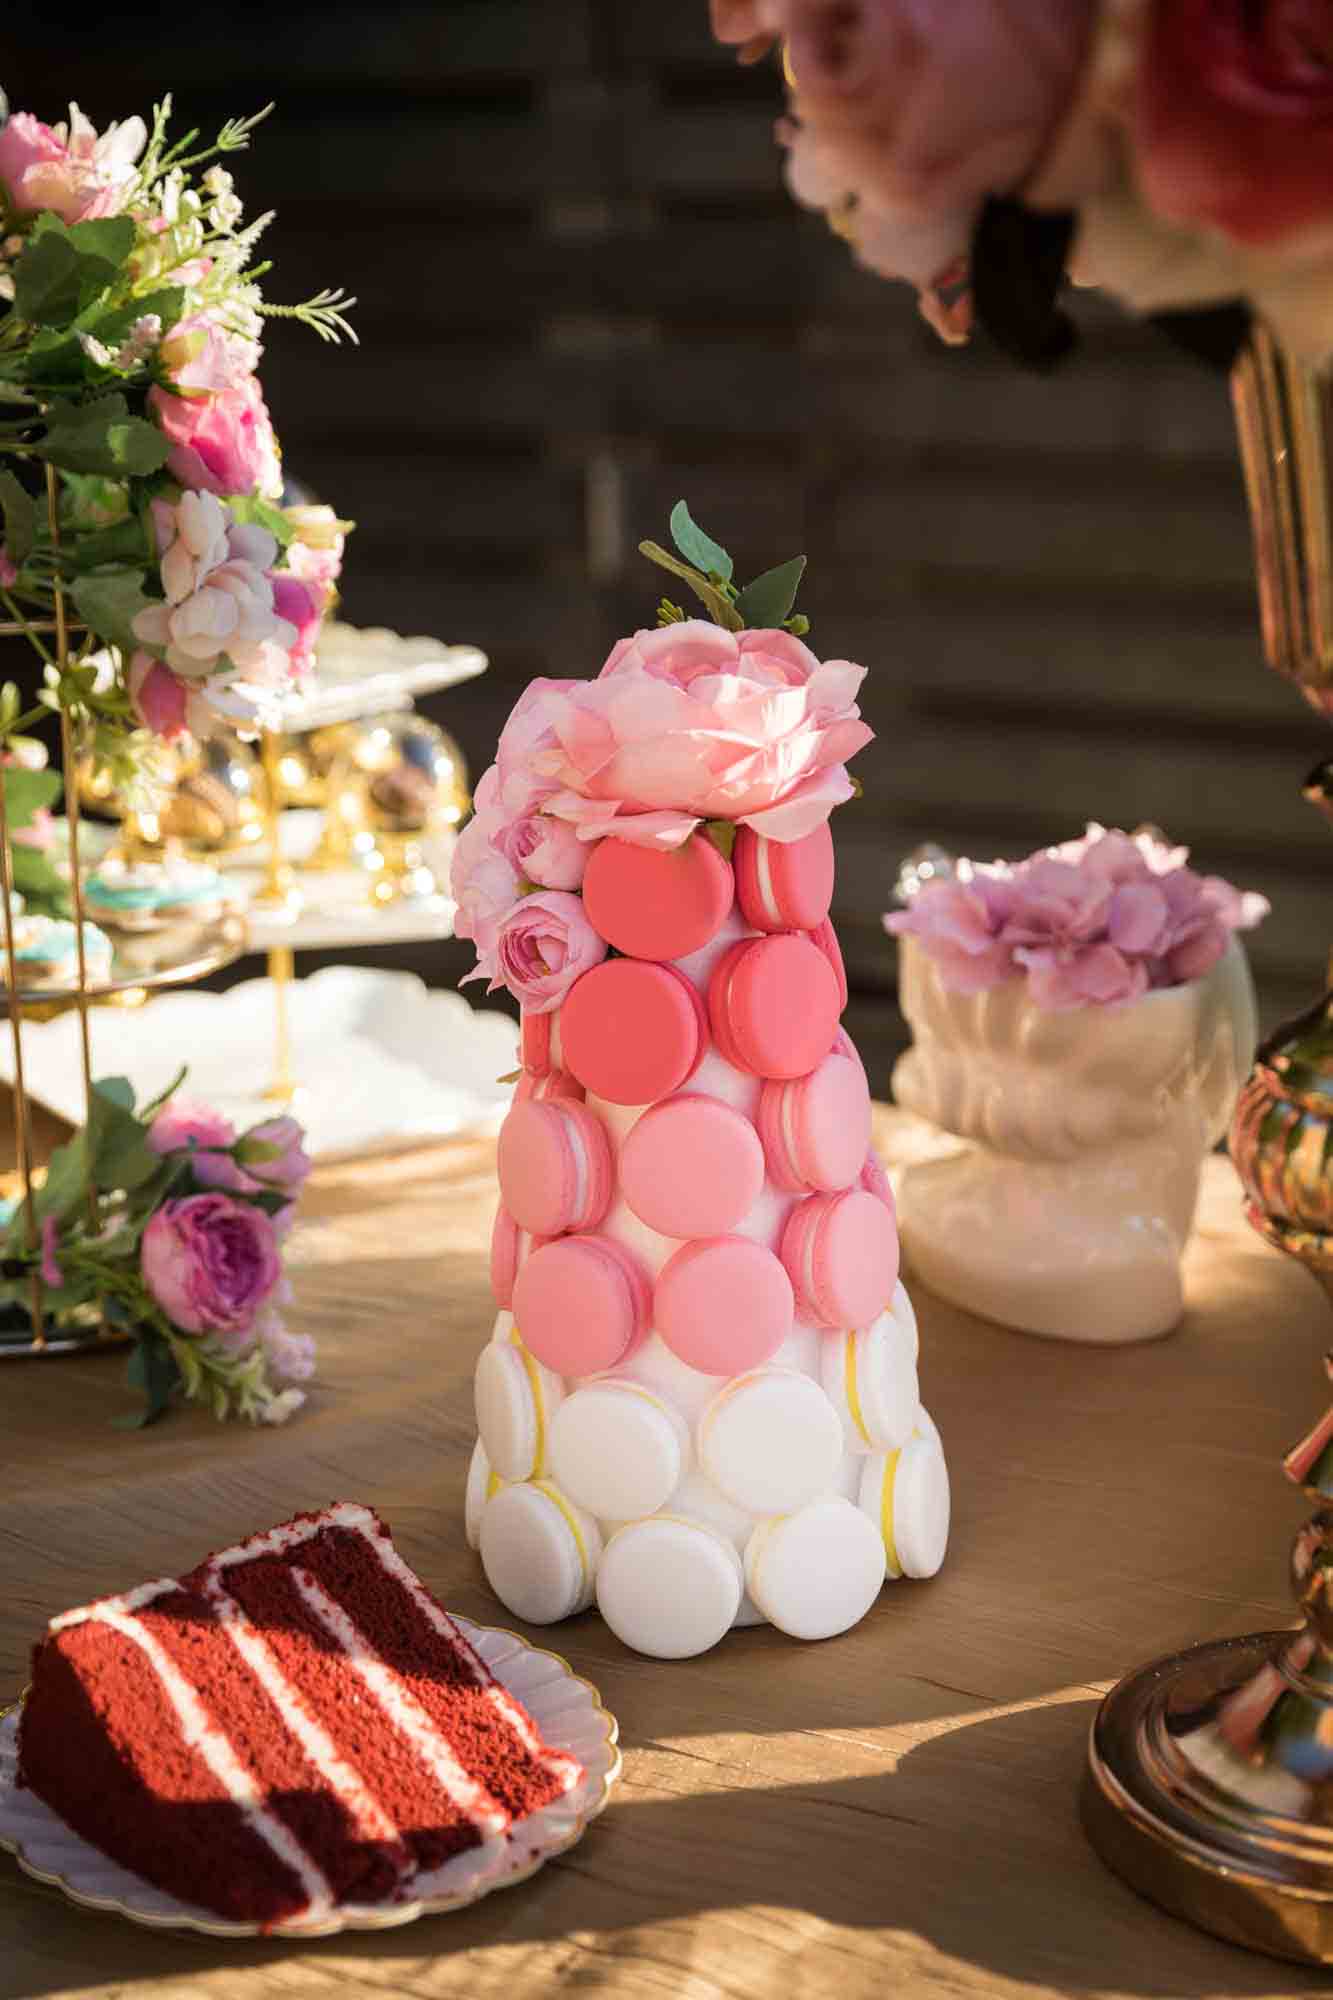 A tower of pink and white macarons on a table of elaborate desserts